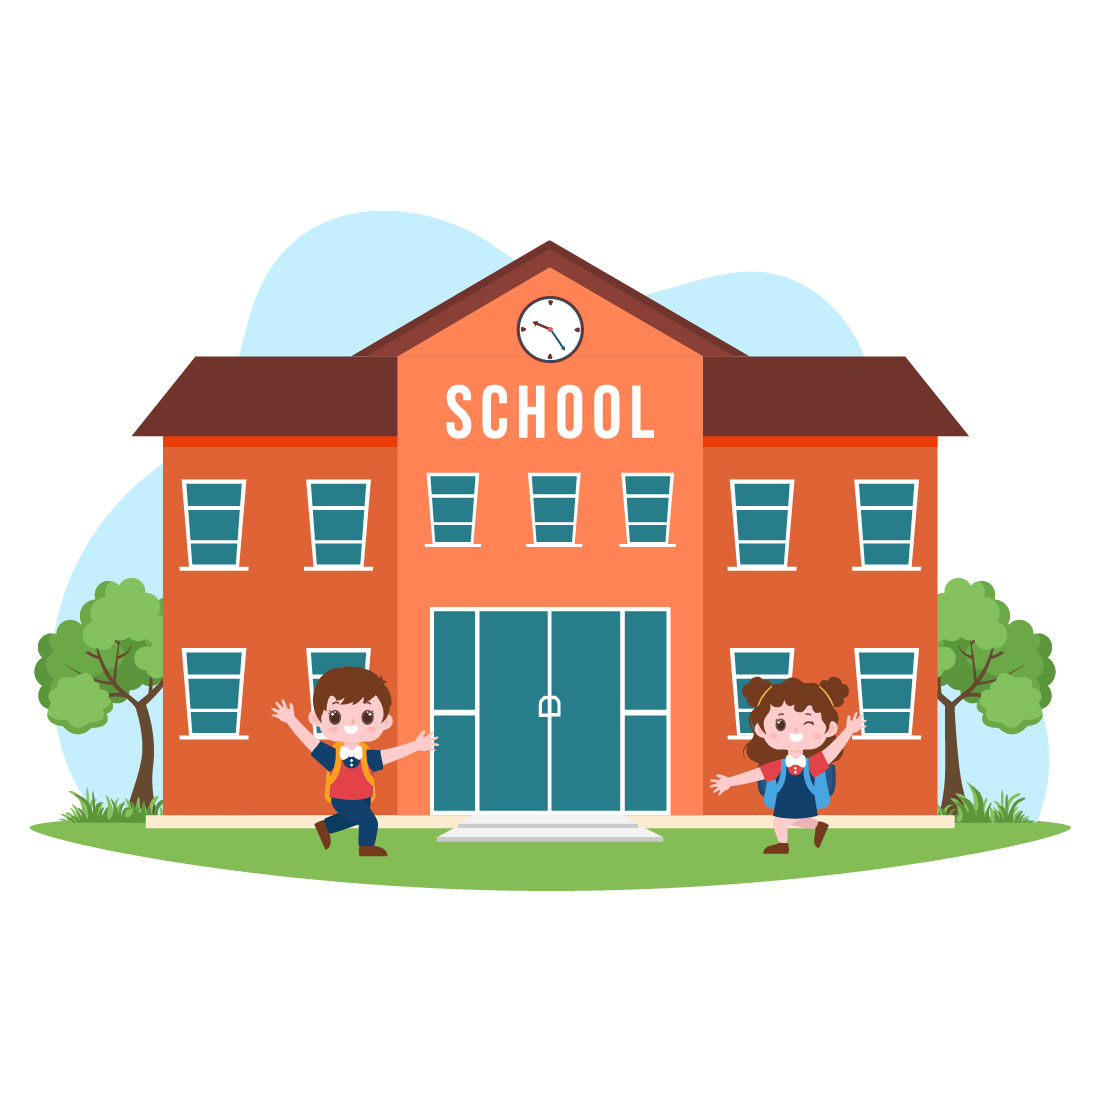 11 Primary School Illustration preview image.